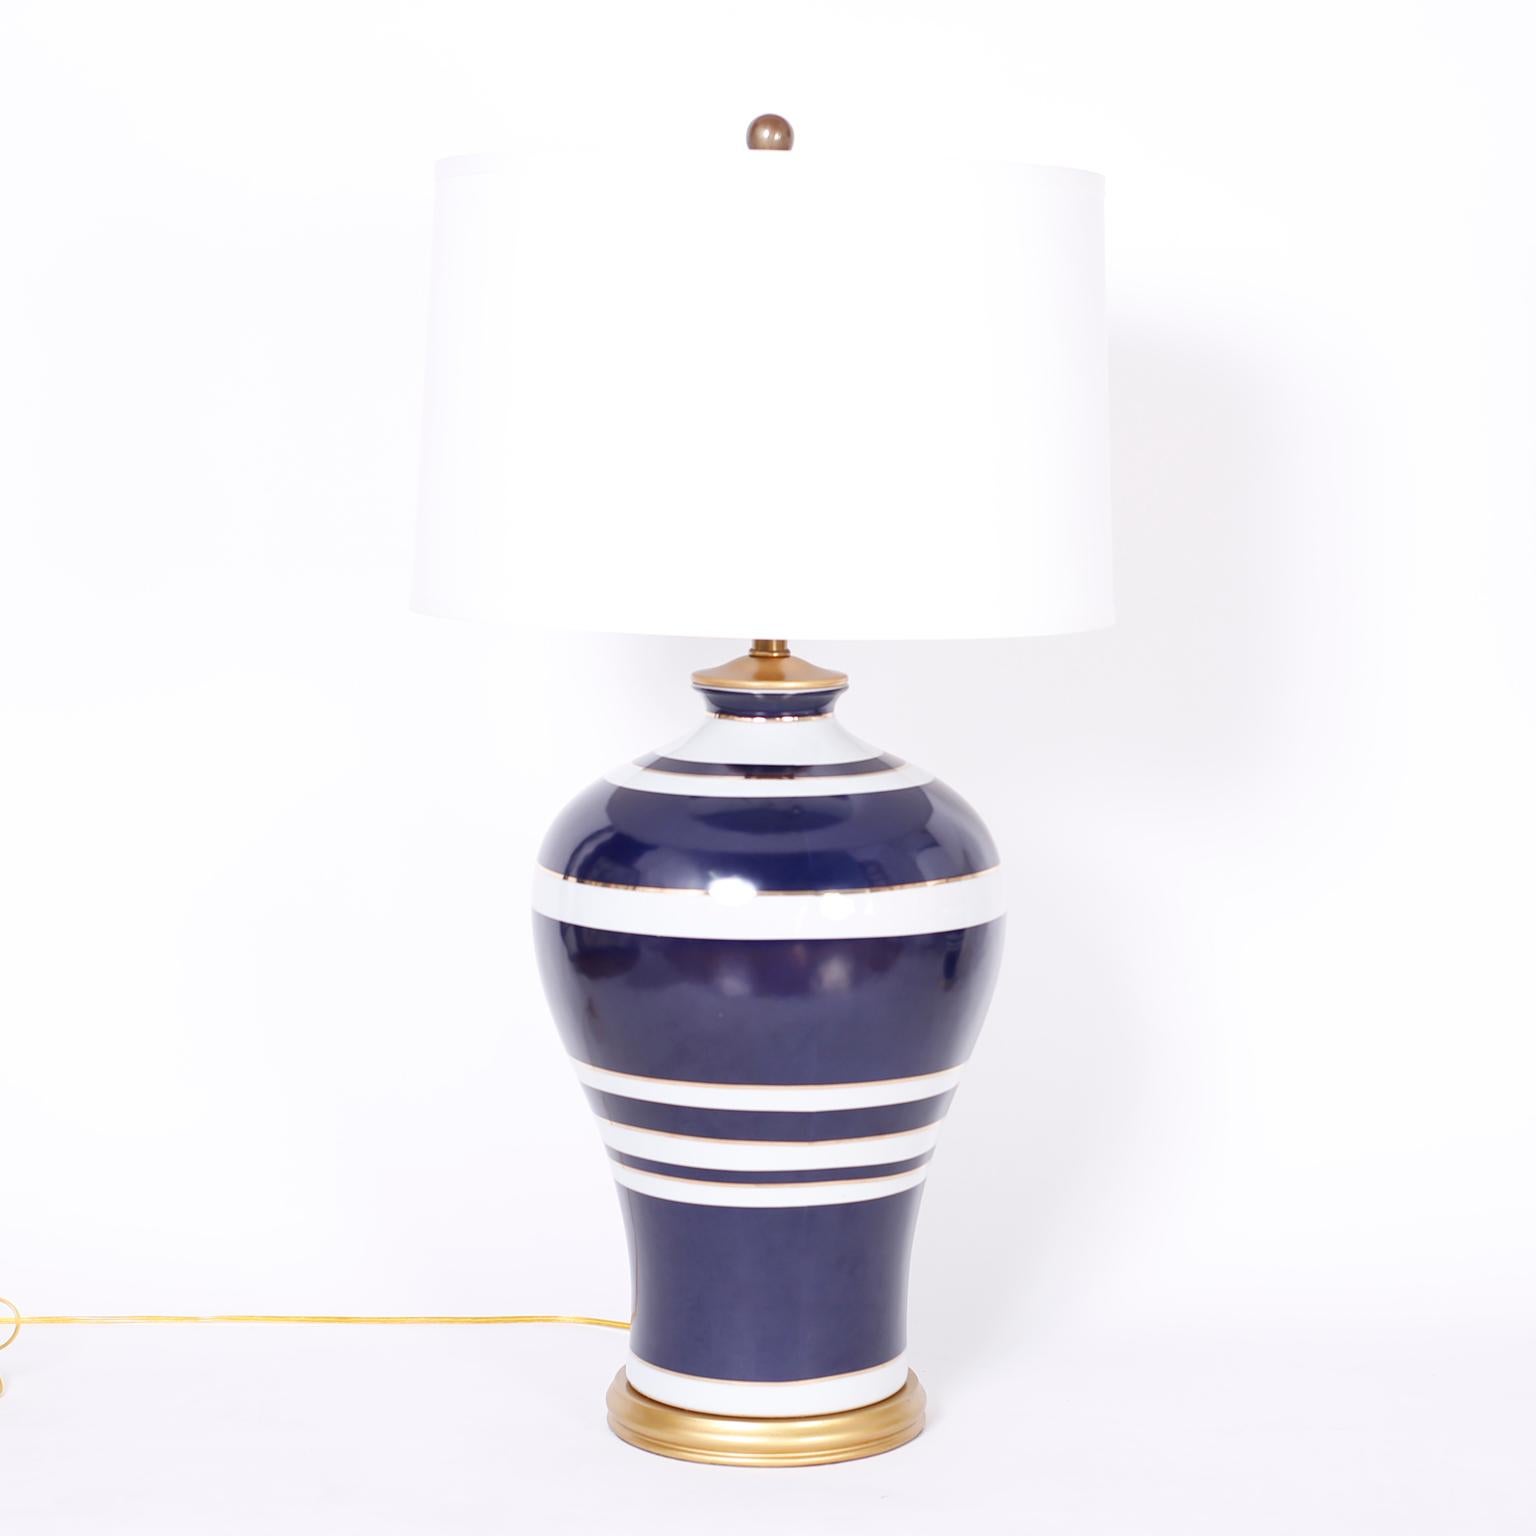 Chic pair of large scale table lamps crafted in porcelain with a Classic form and decorated with blue and white stripes. Signed Ralph Lauren on brass plaque.